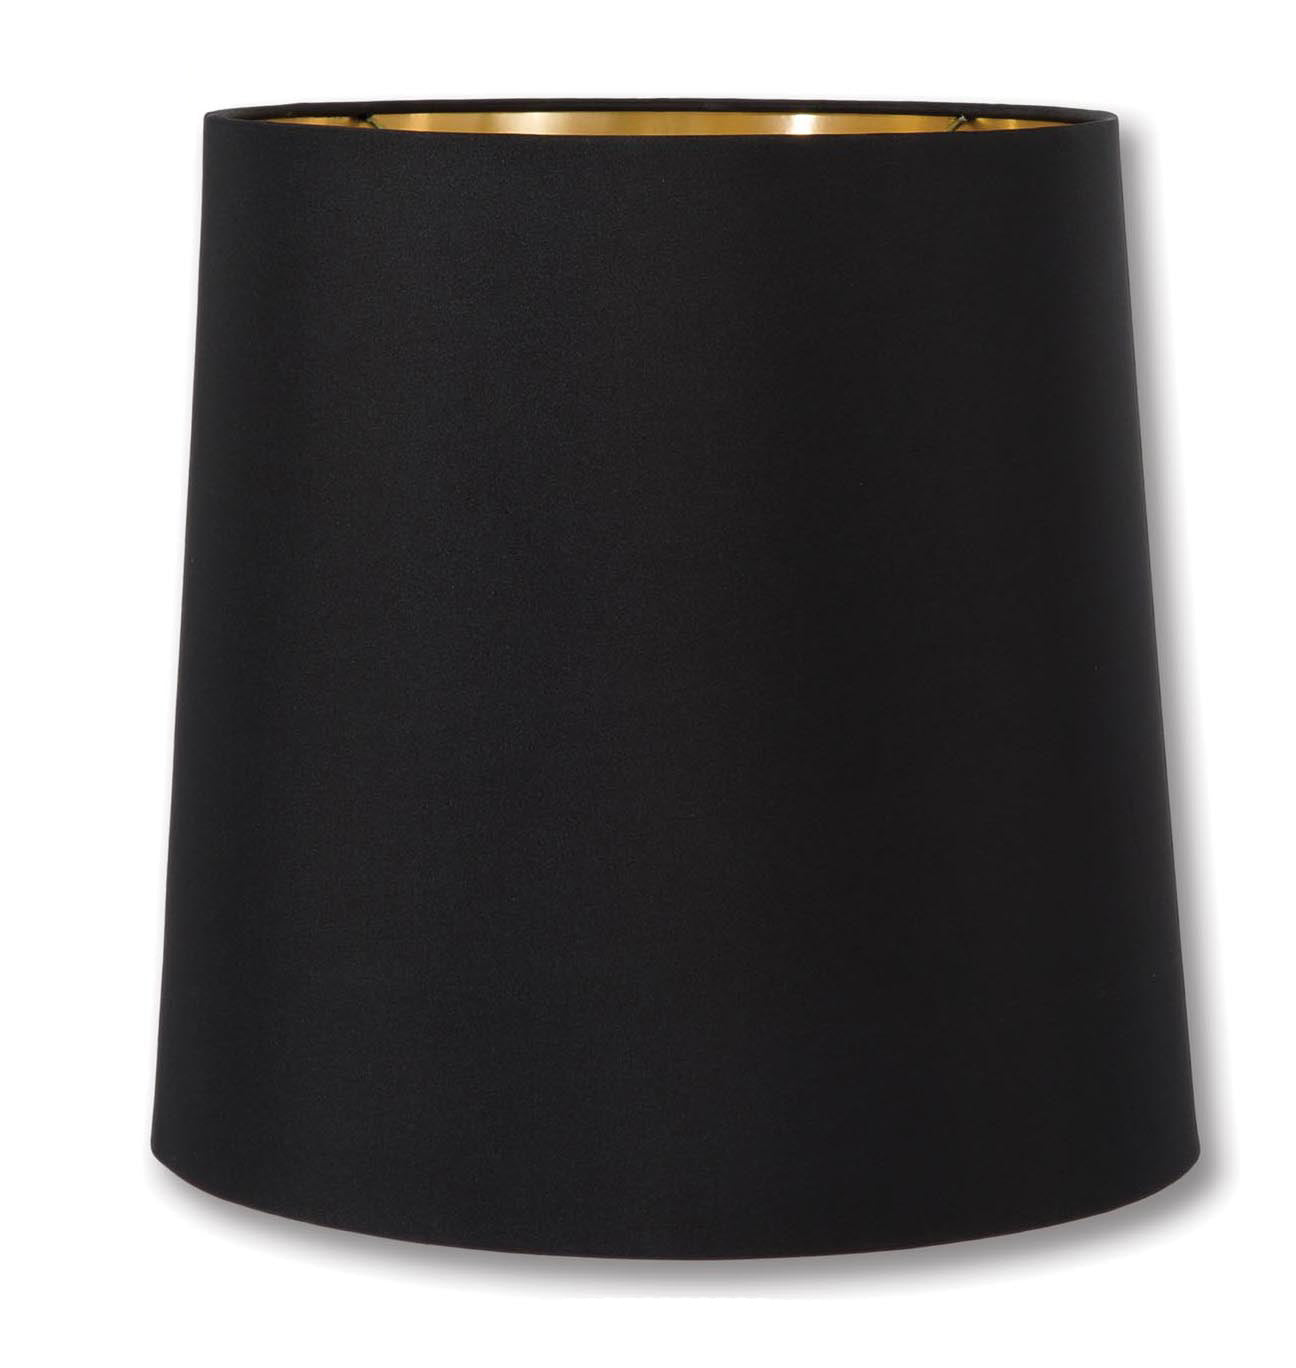 Tapered Deep Drum Lamp Shades - Black Color, Microfiber Chiffon Material w/Gold Foil Lining